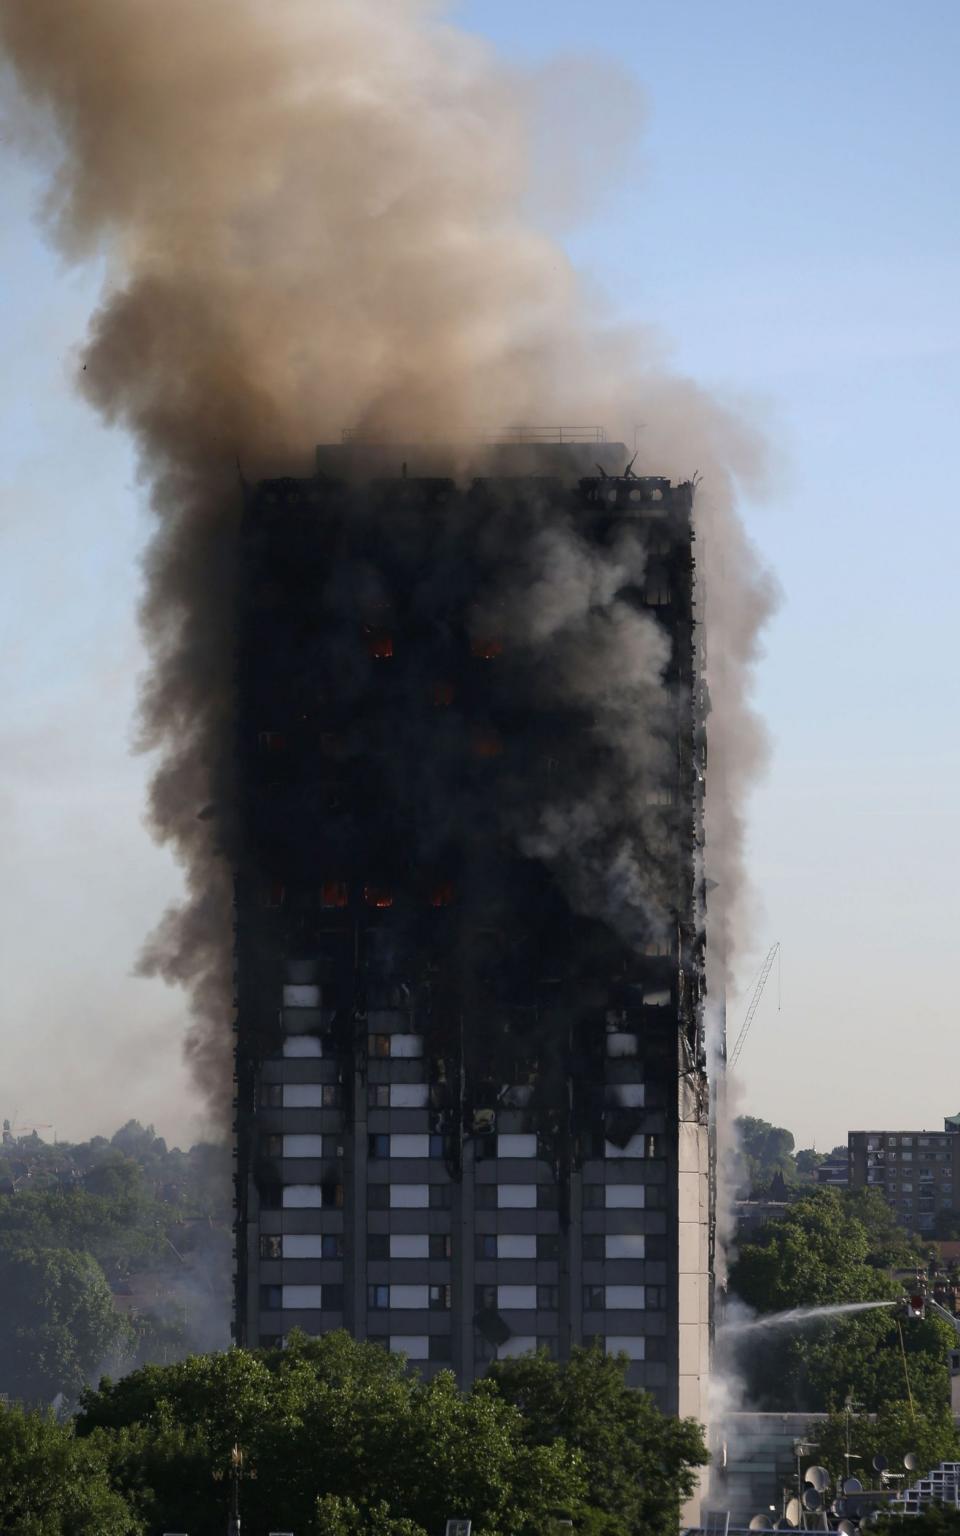 At least 79 people died in the Grenfell Tower fire which was started by a faulty Hotpoint fridge-freezer - Credit: AFP